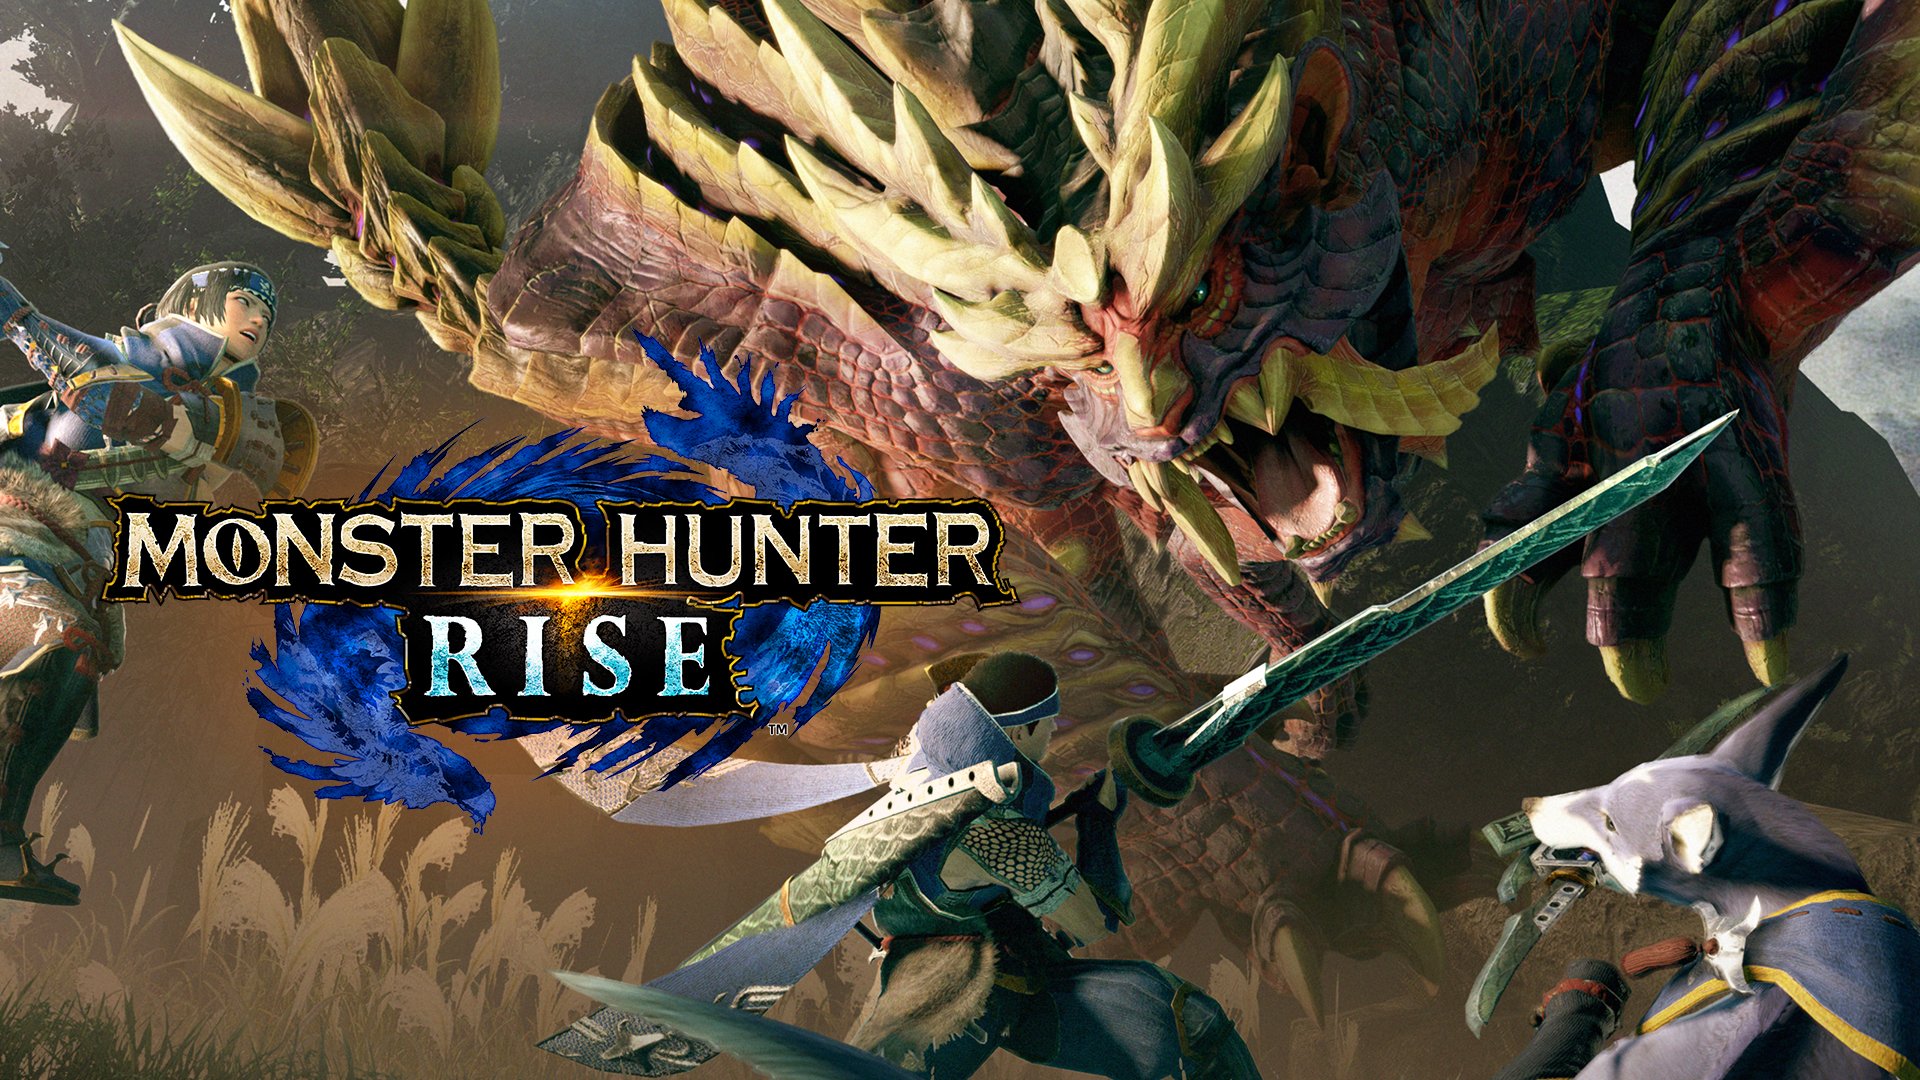 Stealth on X: The Monster Hunter Rise website has high resolution